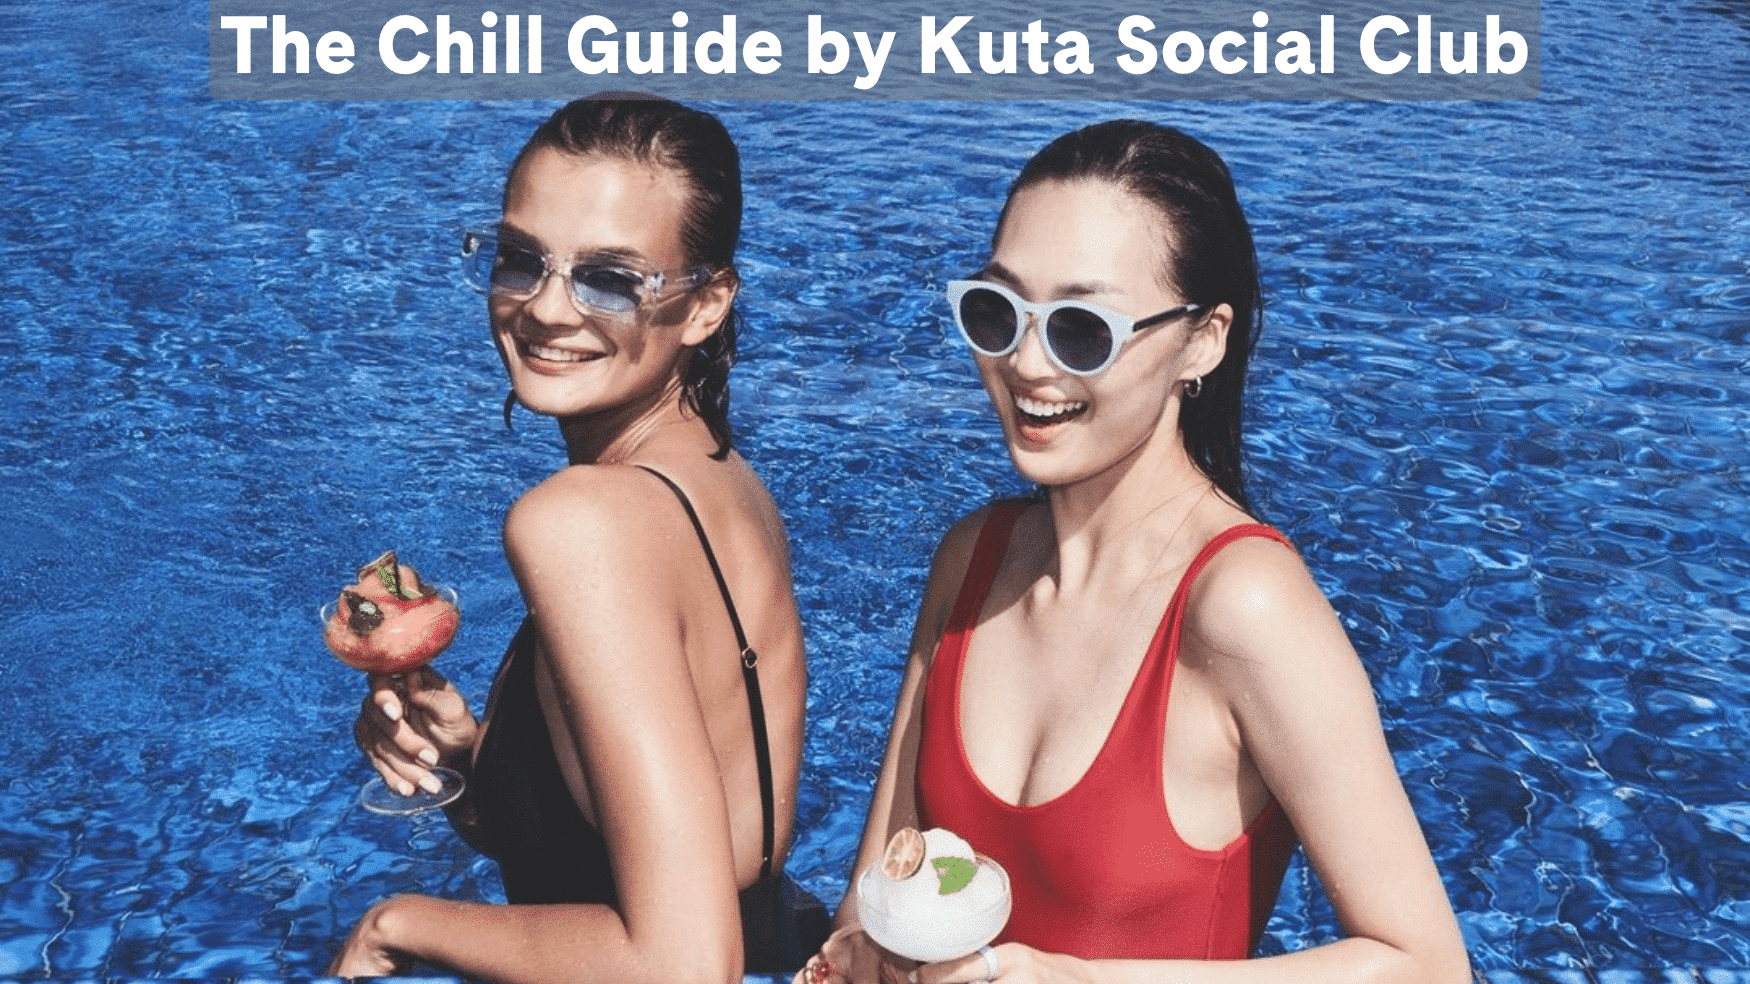 The Chill Guide by Kuta Social Club